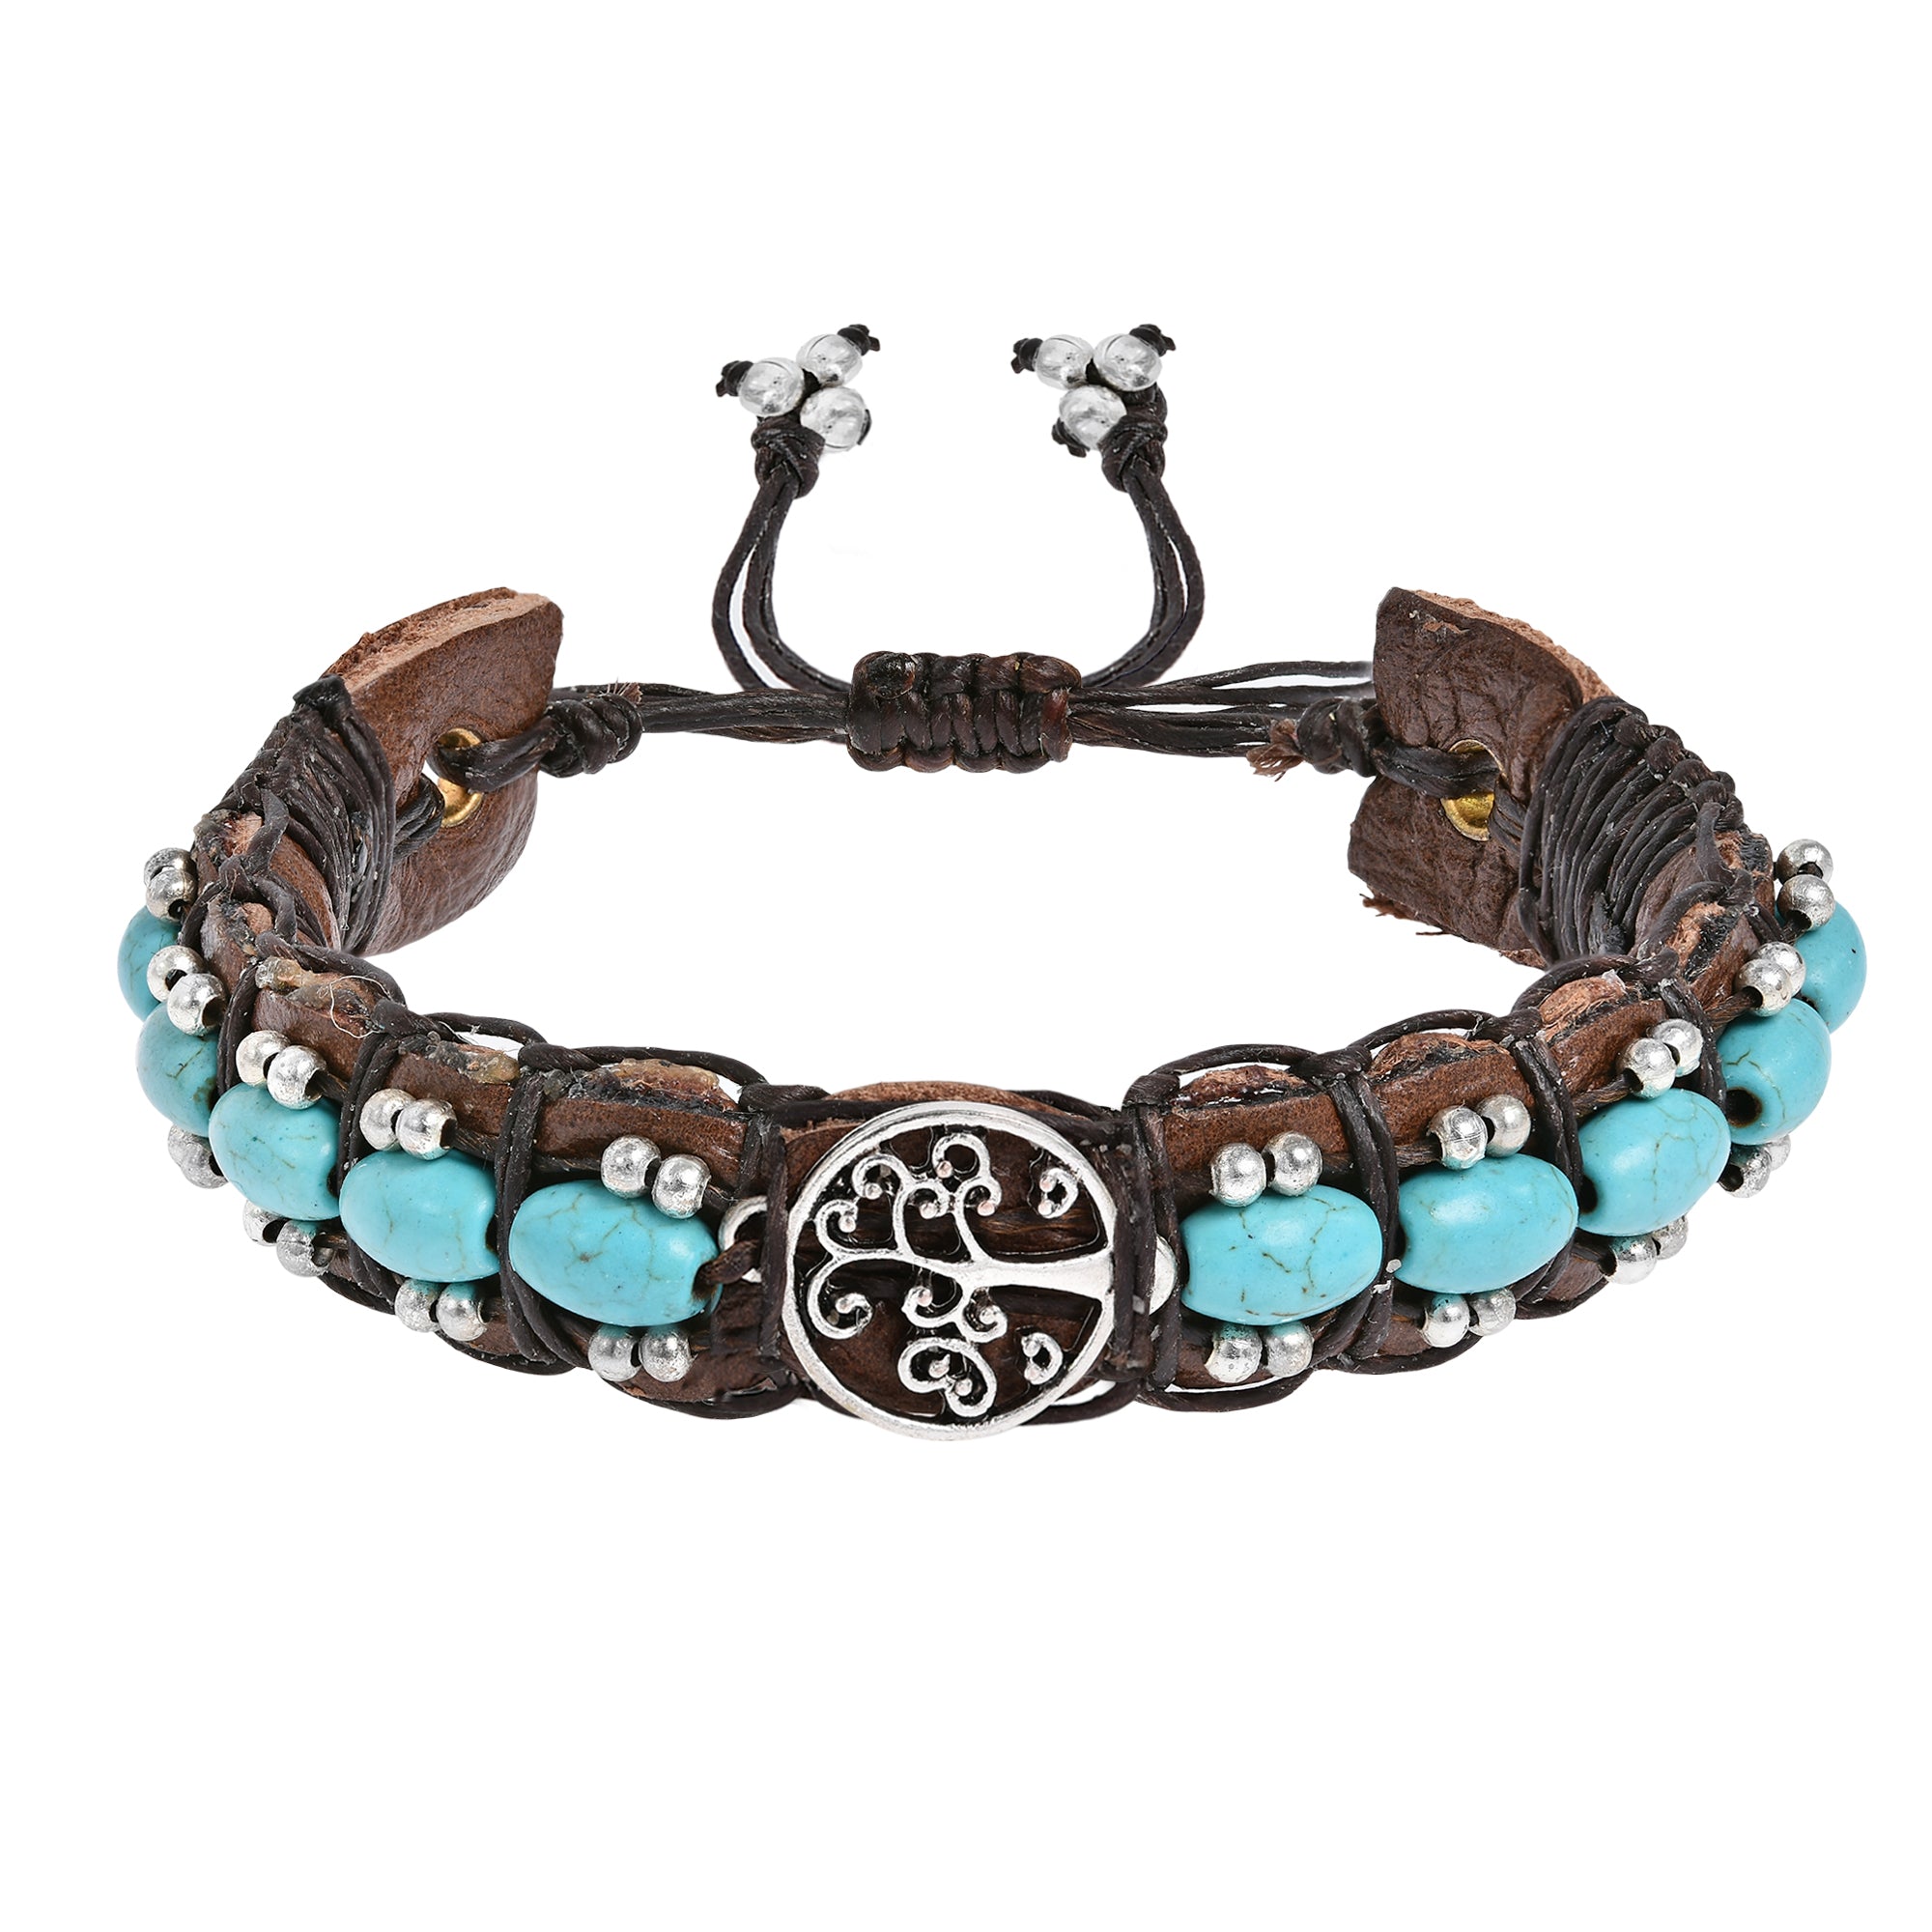 Handcrafted Mystical Tree of Life Symbol Leather Bracelet w/ Turquoise Stones